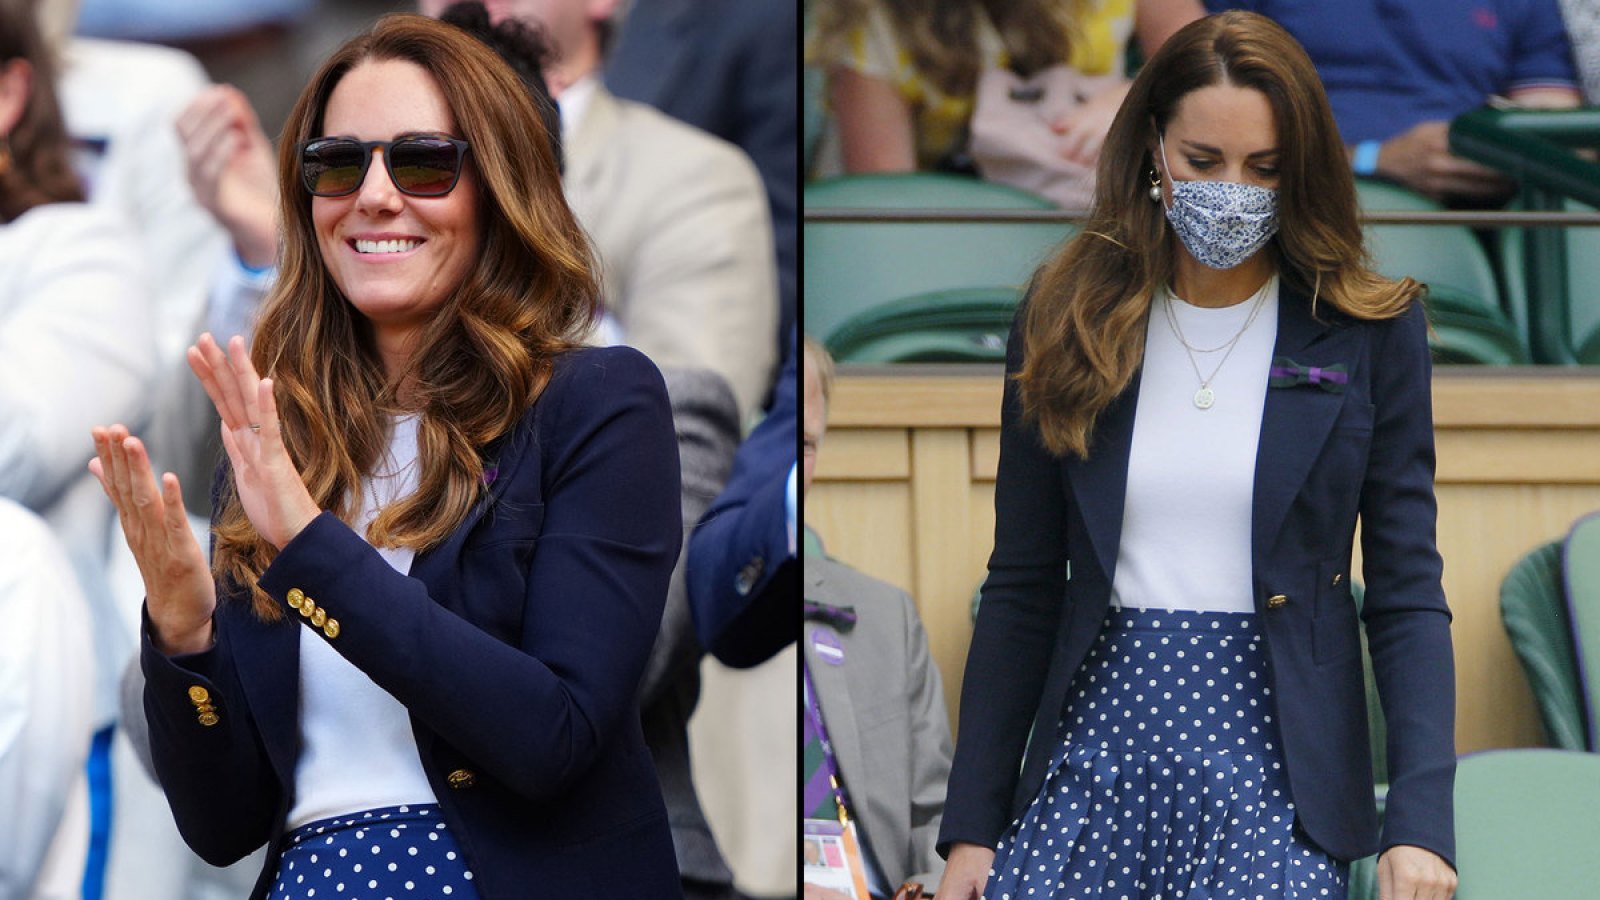 Channel-Duchess-Kates-Wimbledon-Look-With-This-Polka-Dot-Skirt